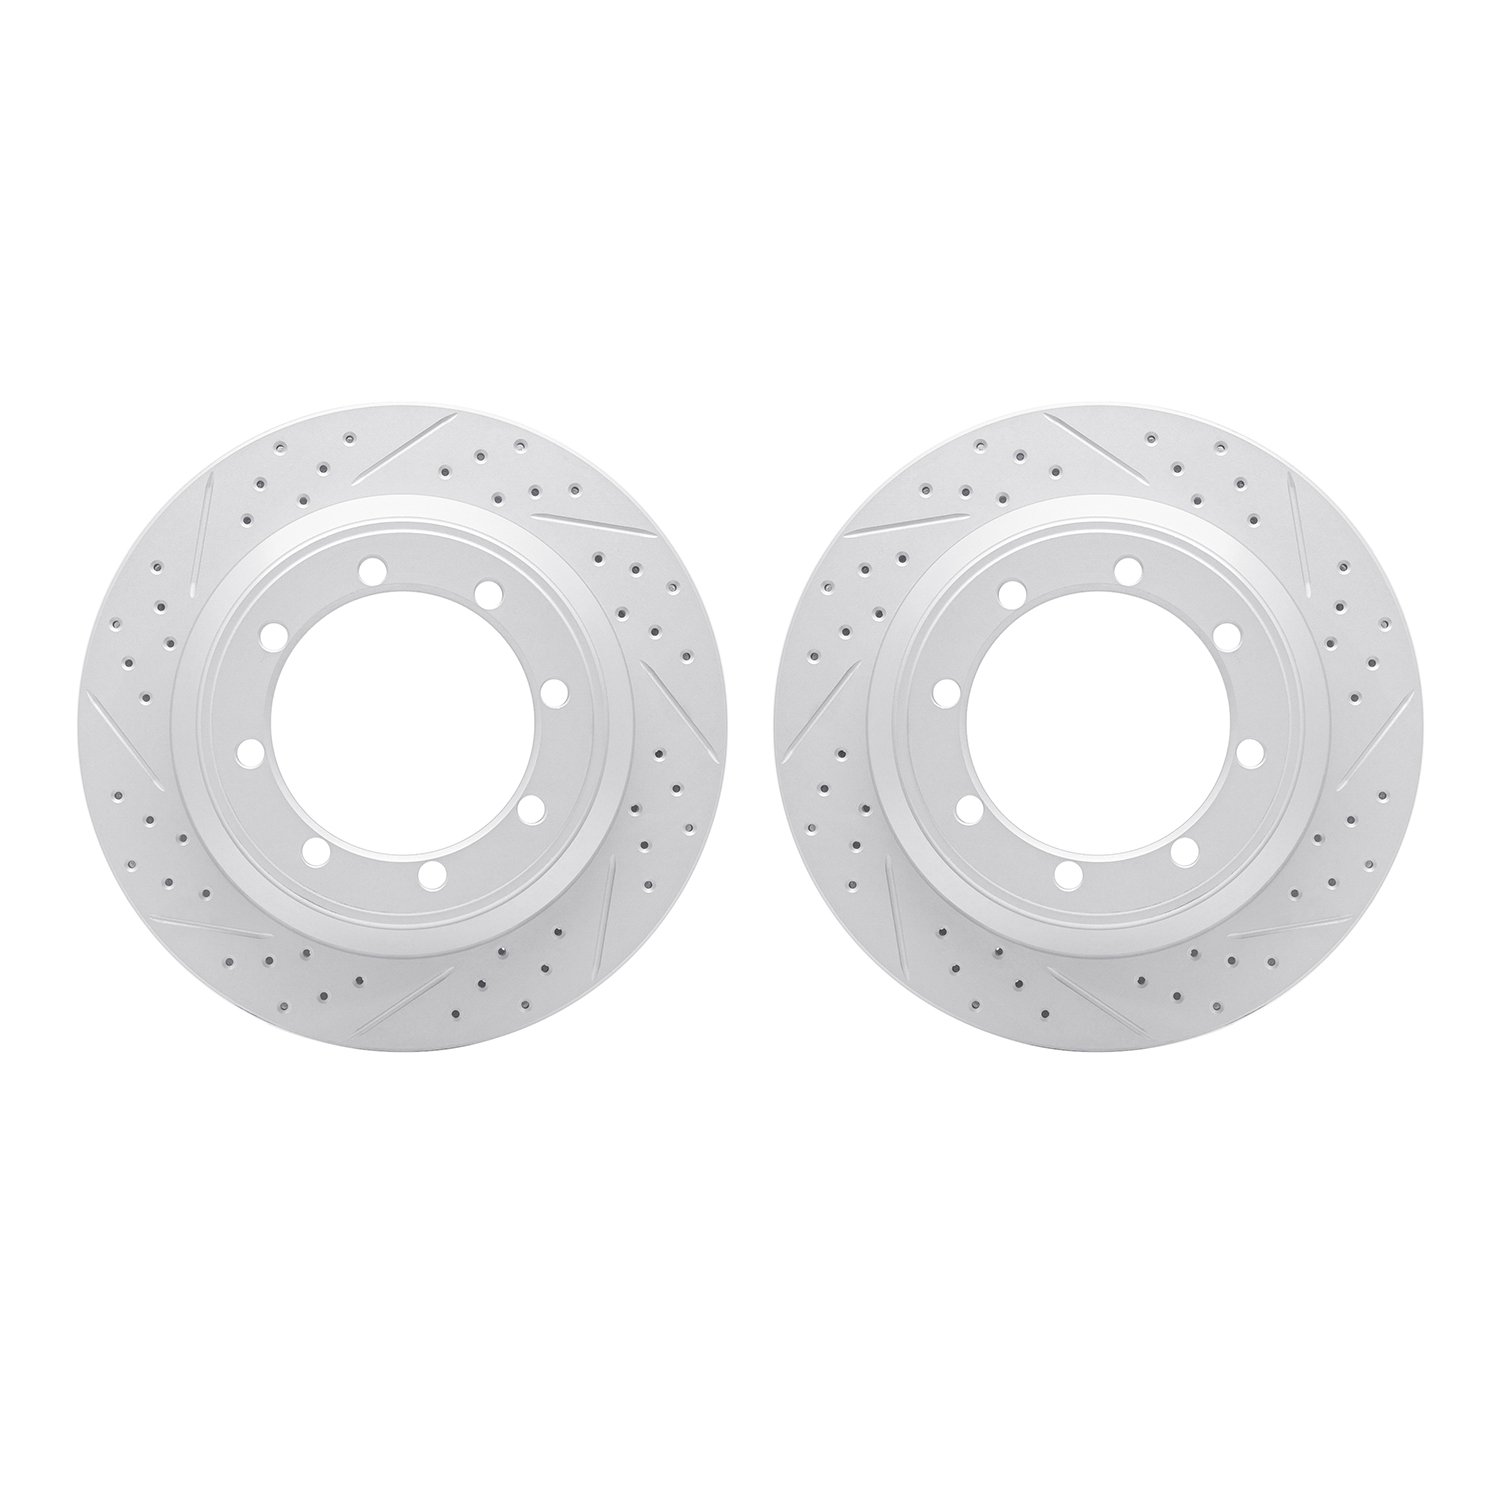 2002-54122 Geoperformance Drilled/Slotted Brake Rotors, 1999-2007 Ford/Lincoln/Mercury/Mazda, Position: Rear